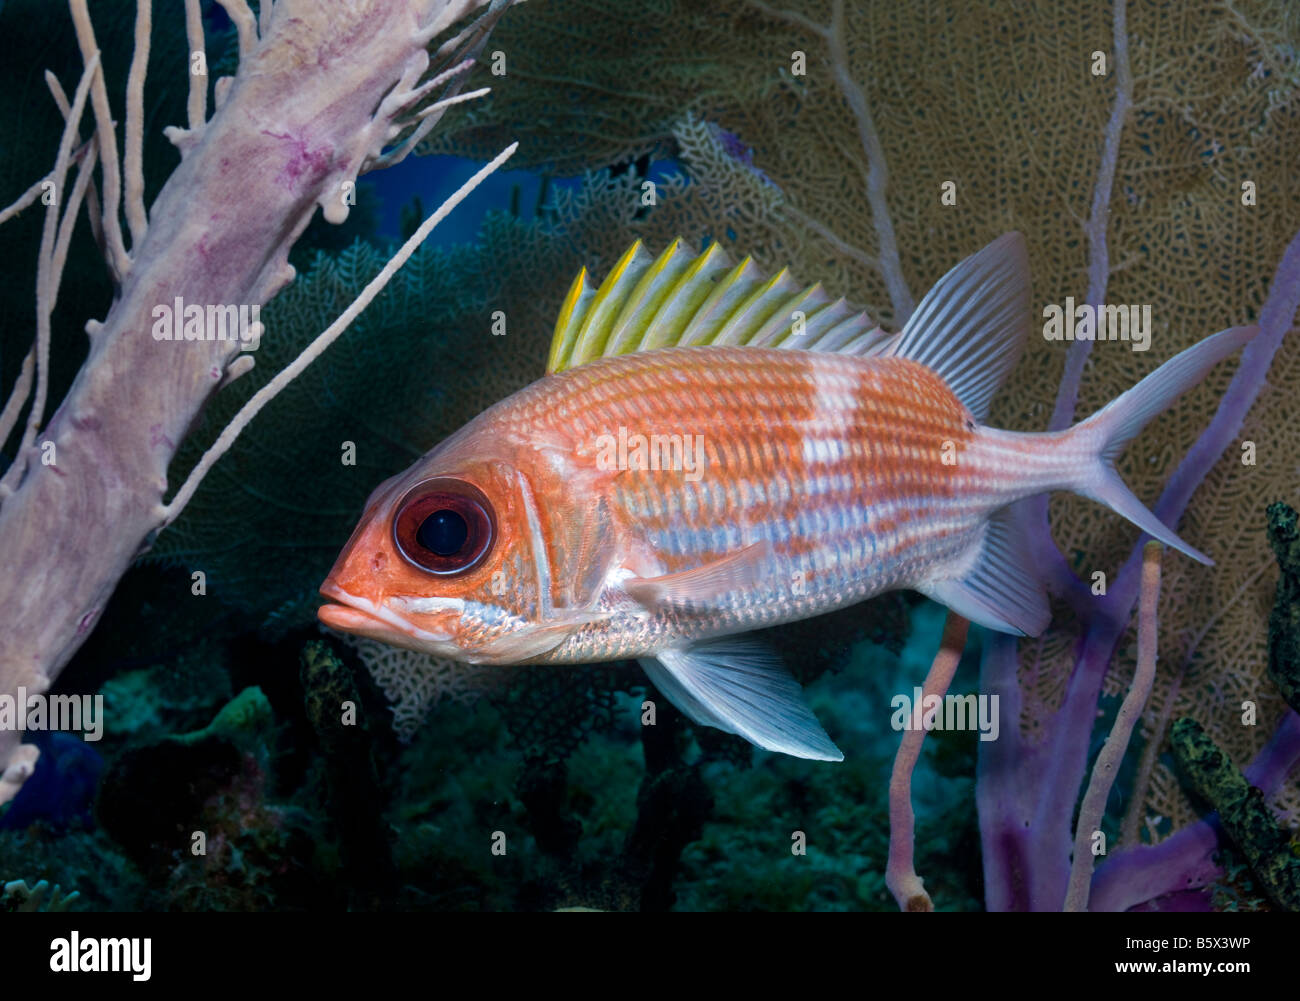 Squirrelfish (Holocentrus adscensionsis) in the shelter of a Sea plume (Pseudopterogorgia spp.), Bloody Bay, Little Cayman Stock Photo